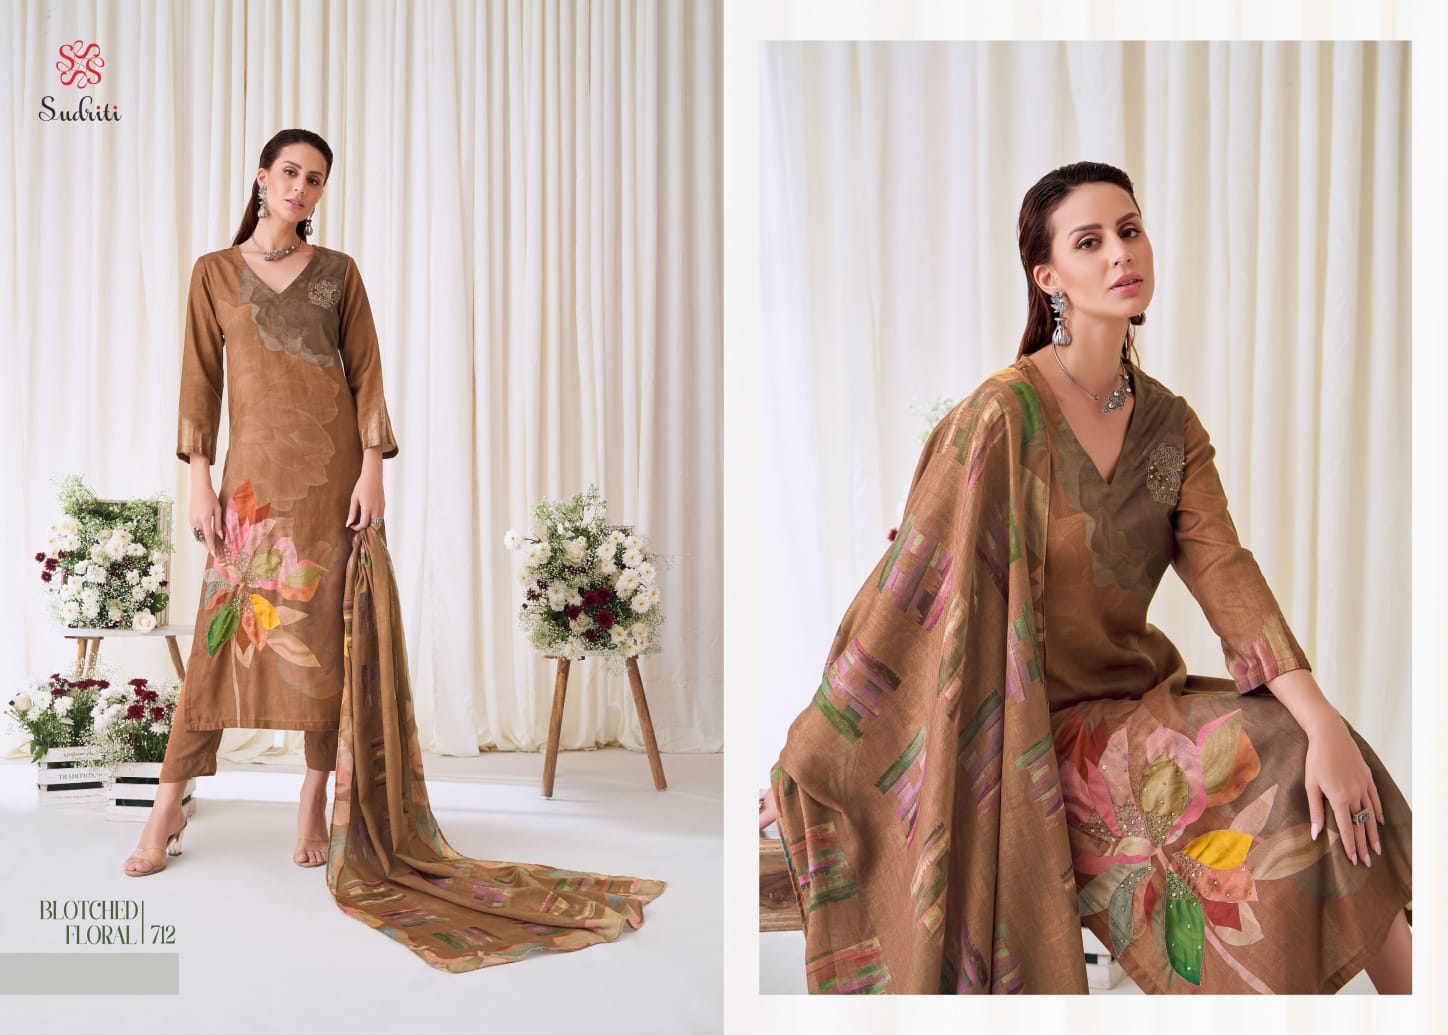 Sudriti Blotched Floral collection 11